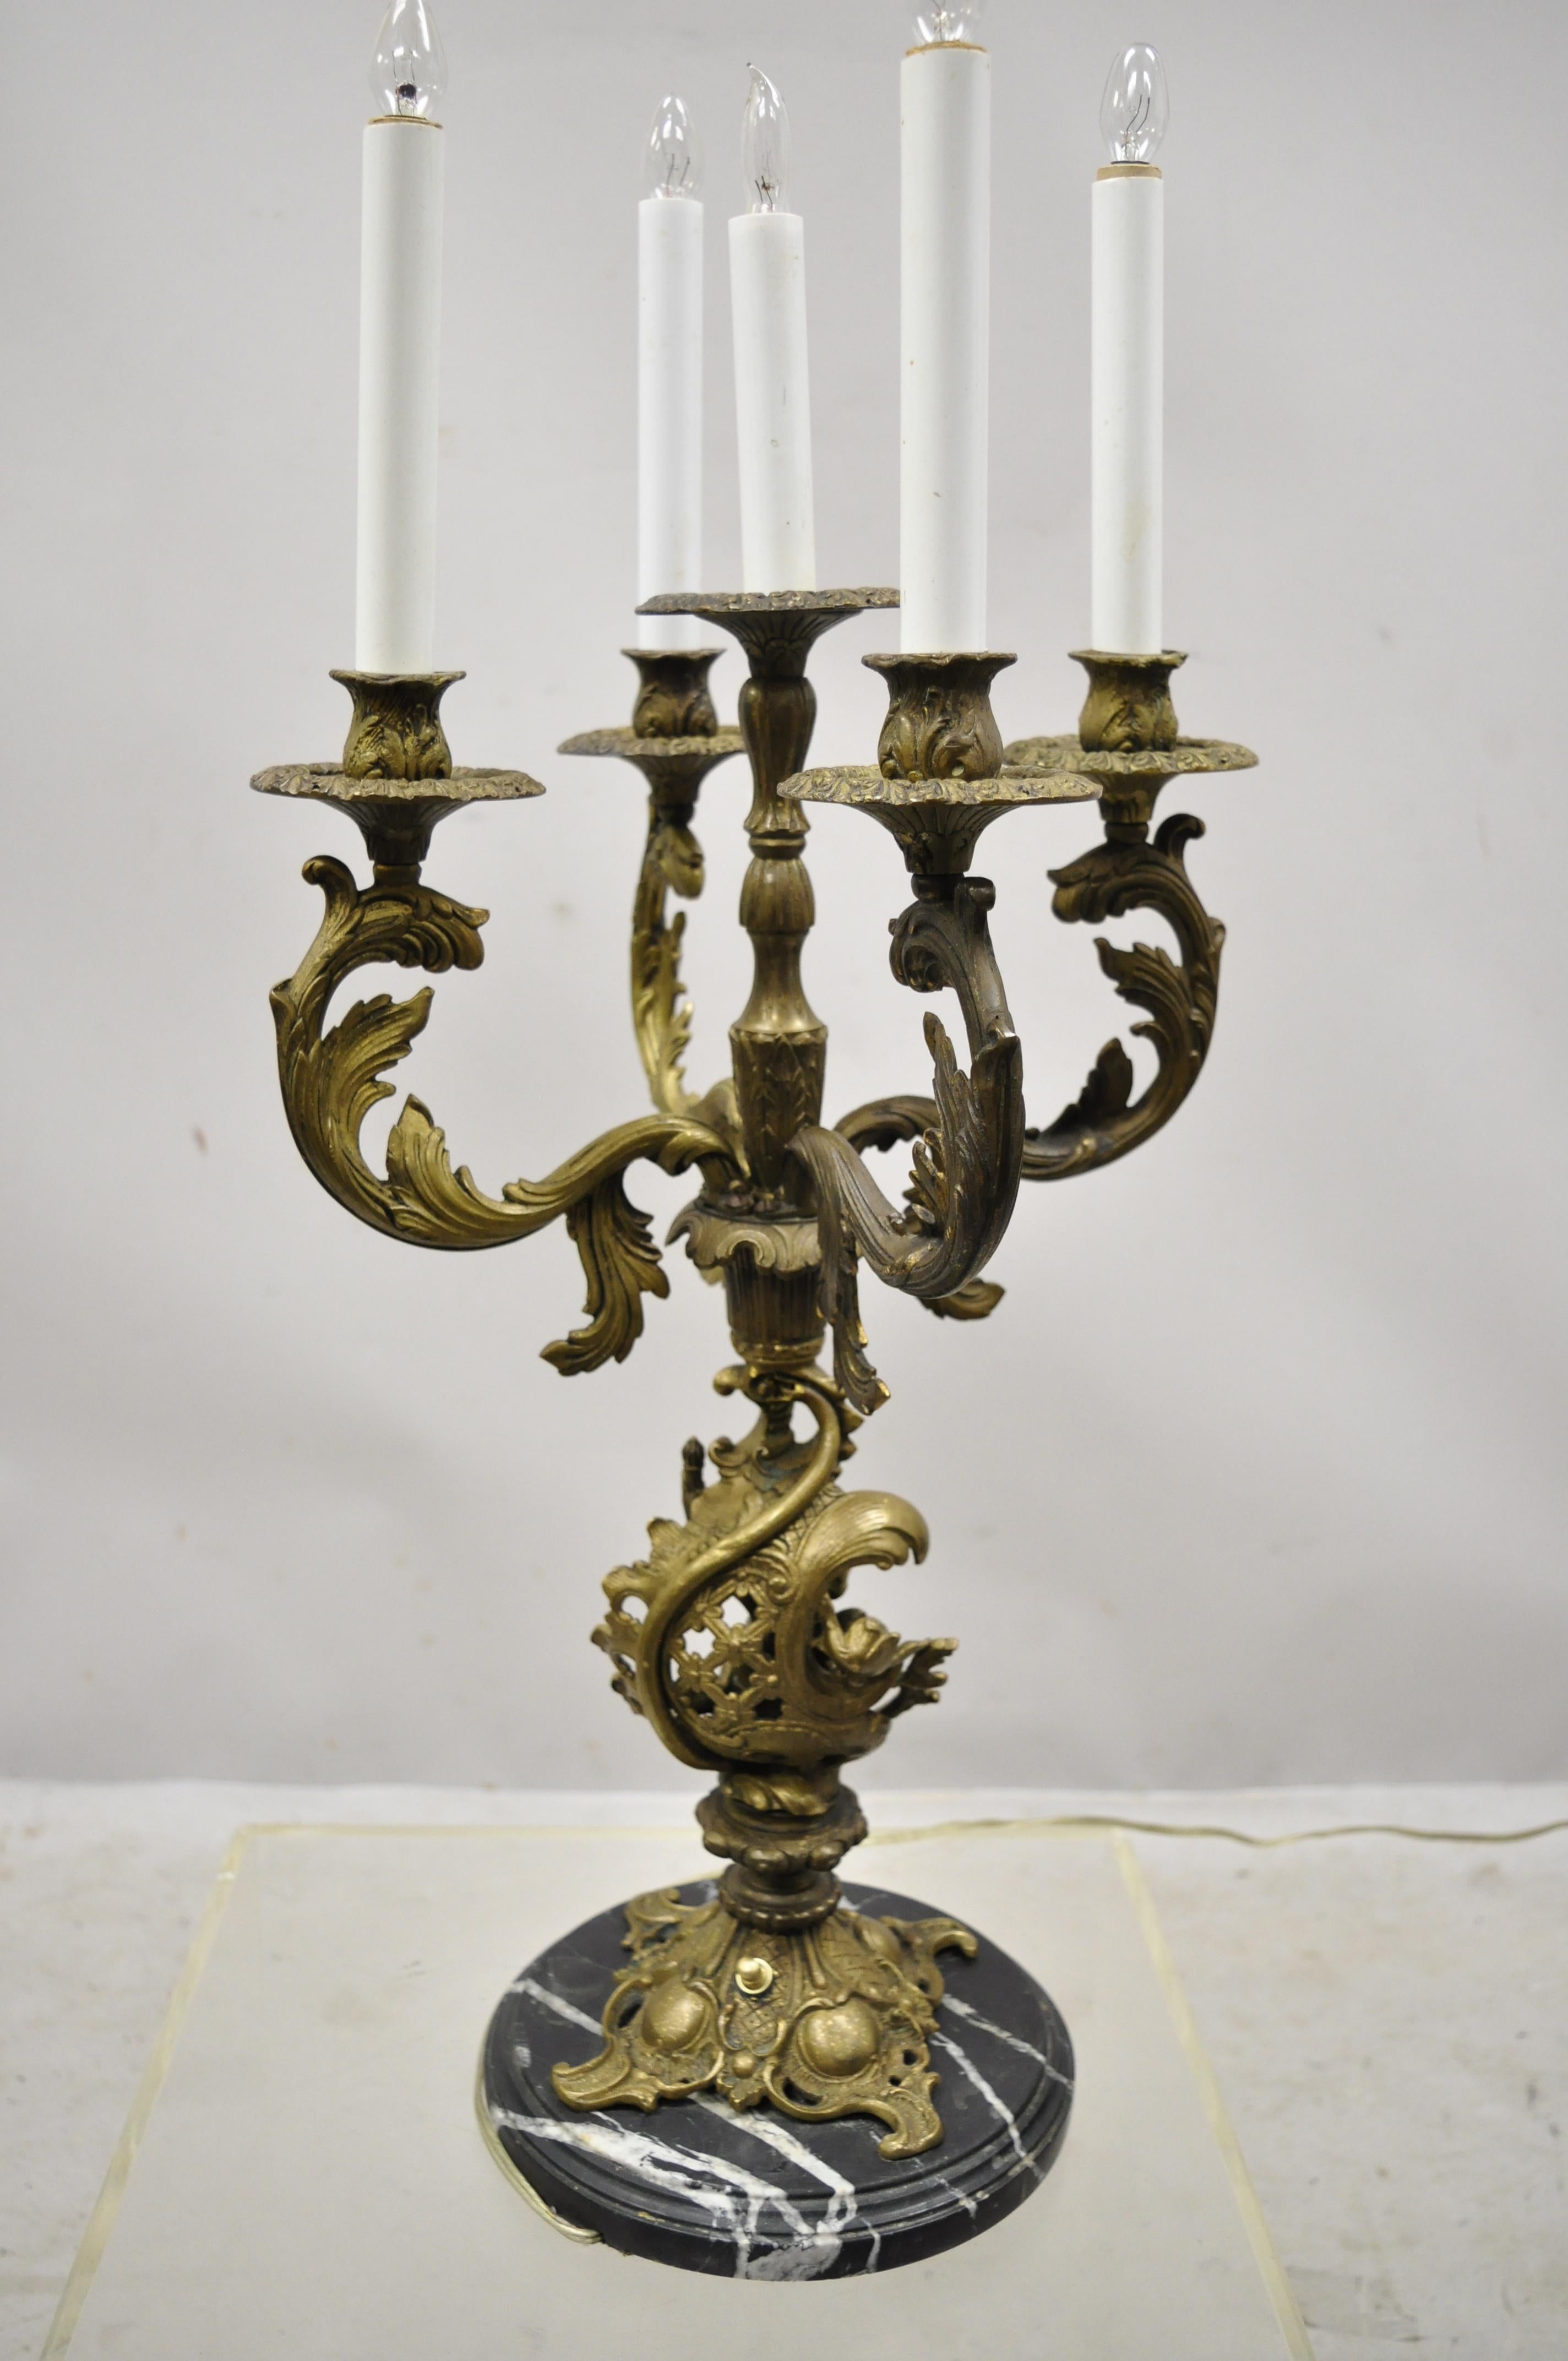 Antique French Louis XV style figural cherub brass and marble candelabrum table lamp. Item features round black marble base, 5 candelabras, figural cherub to center, ornate acanthus arms, great style and form. Has holes for prisms on the bobéches if